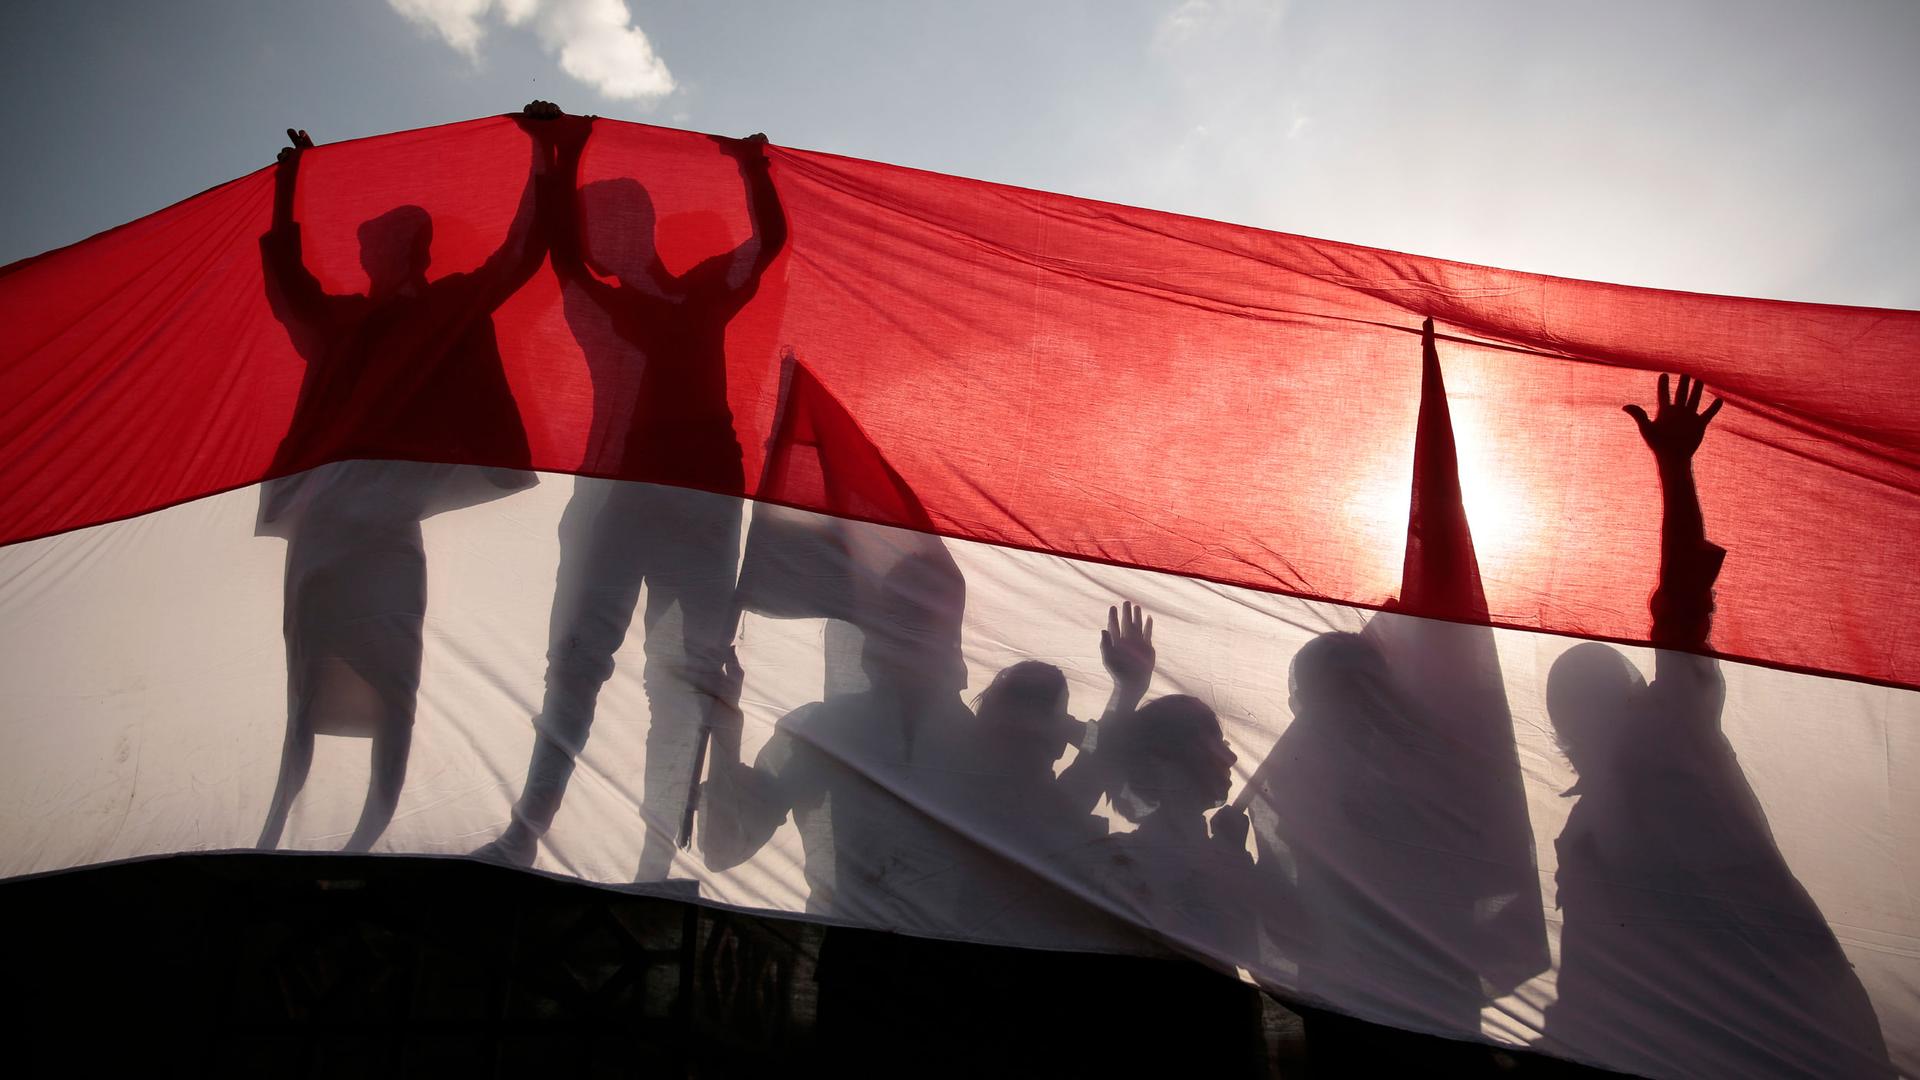 The dark silhouetted of several people are shown with their hands in the air holding up the red, white and black-stripped Yemen flag.